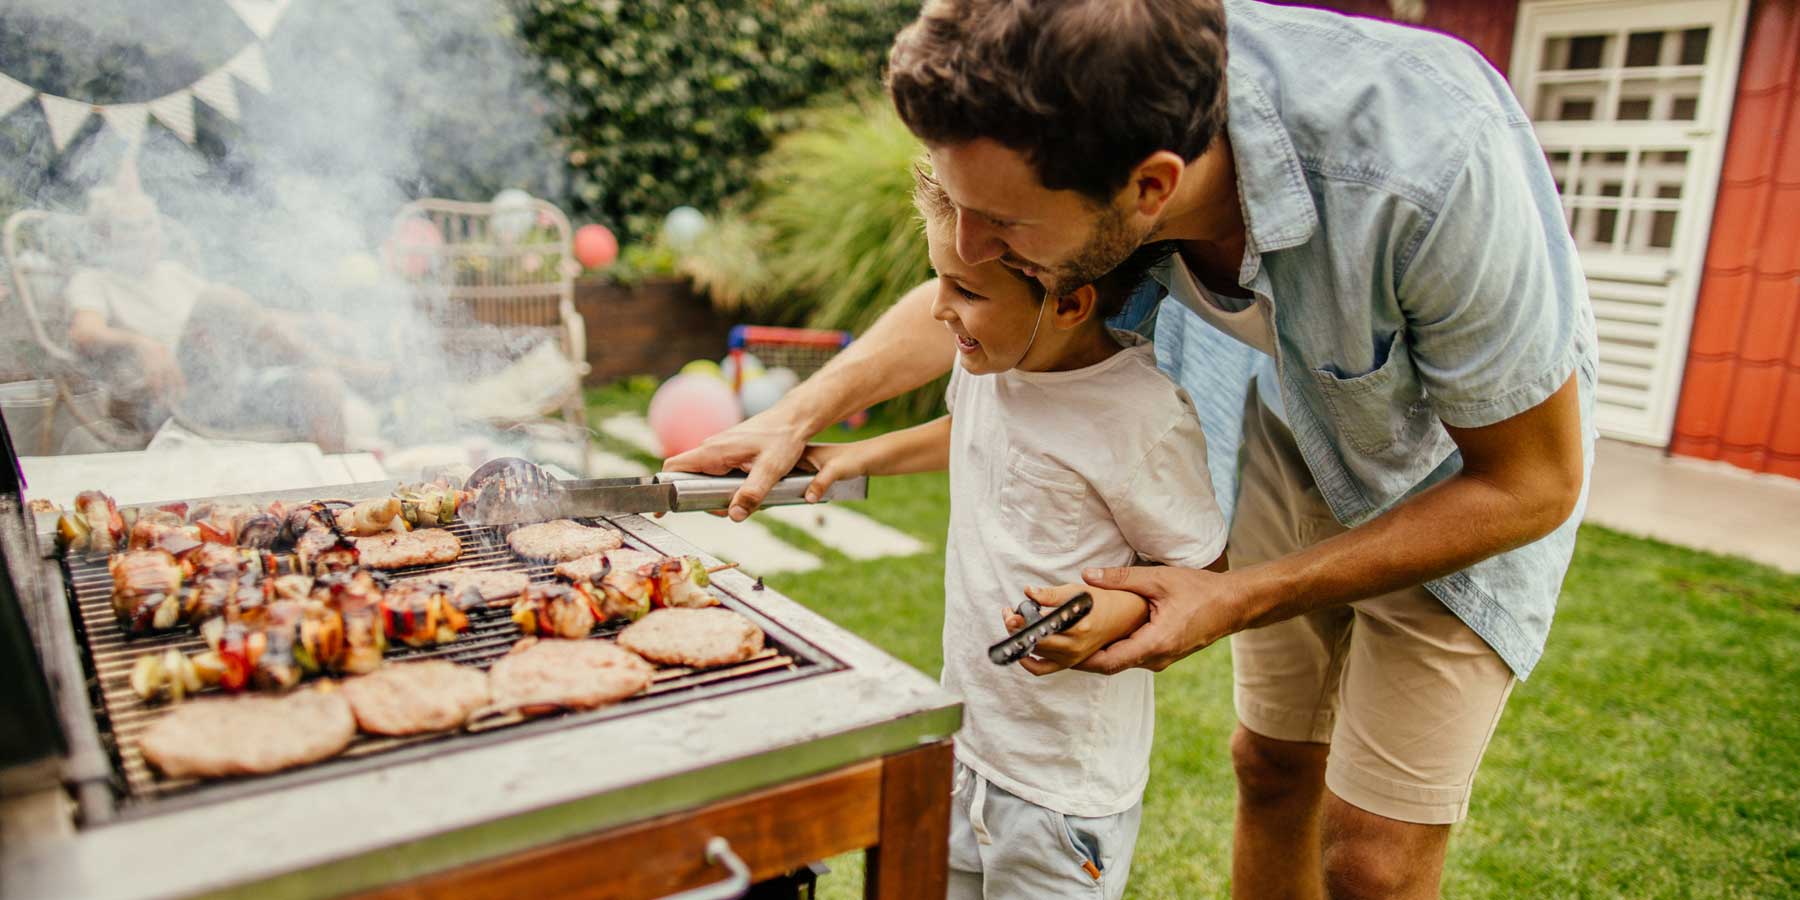 Father and son cooking on a barbecue